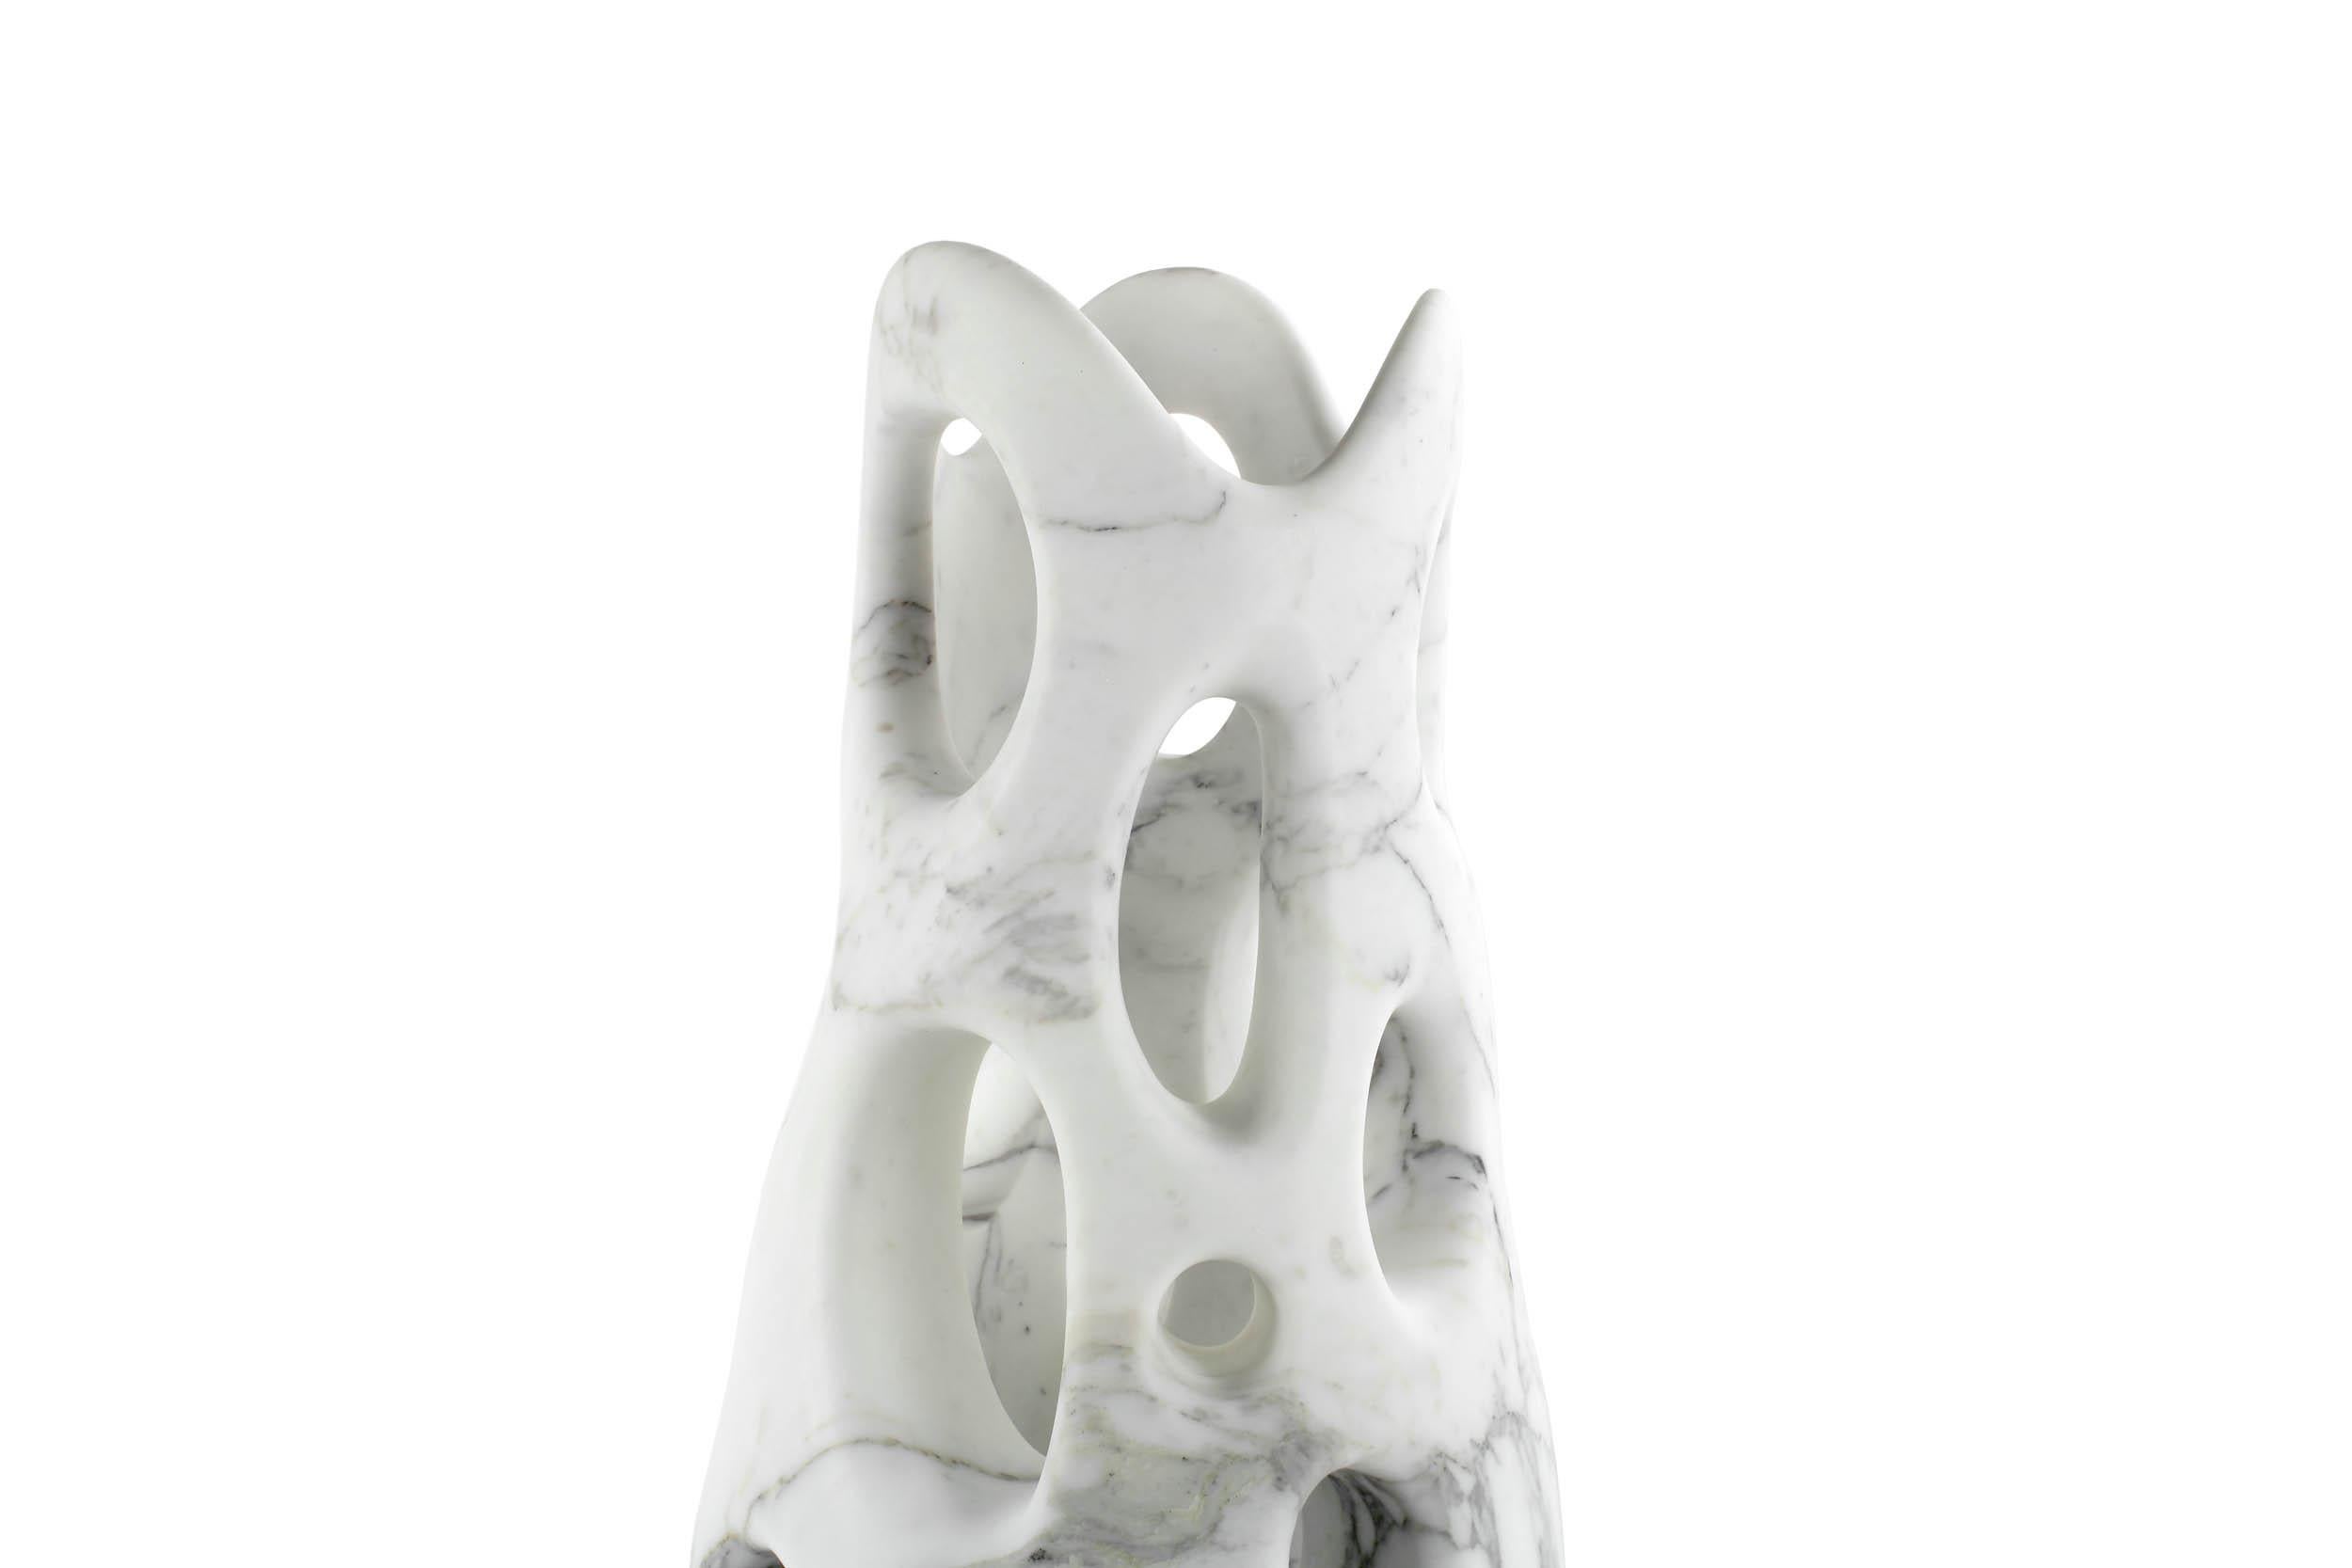 Important sculptural vase carved by hand from a solid block of Arabescato marble. 

Vase dimension: D 30 x H 67 cm. Available in different marbles, onyx and quartzite. 
 
Limited edition of 35.

Each vase is hand signed and numbered by the artists